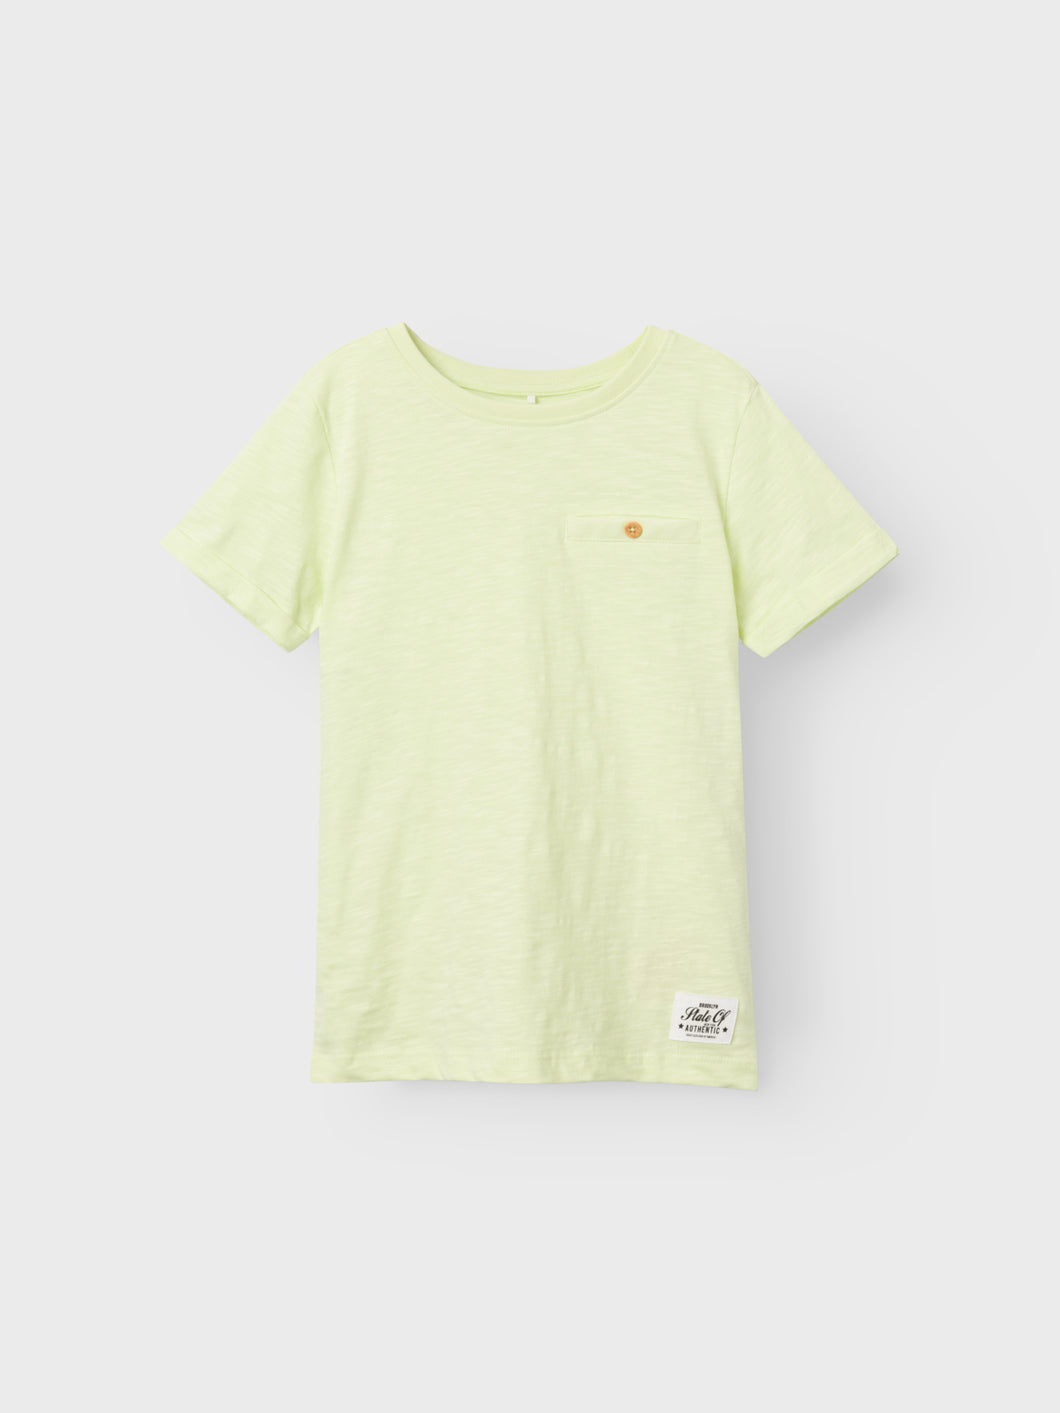 NKMVINCENT T-Shirts & Tops - Lime Cream